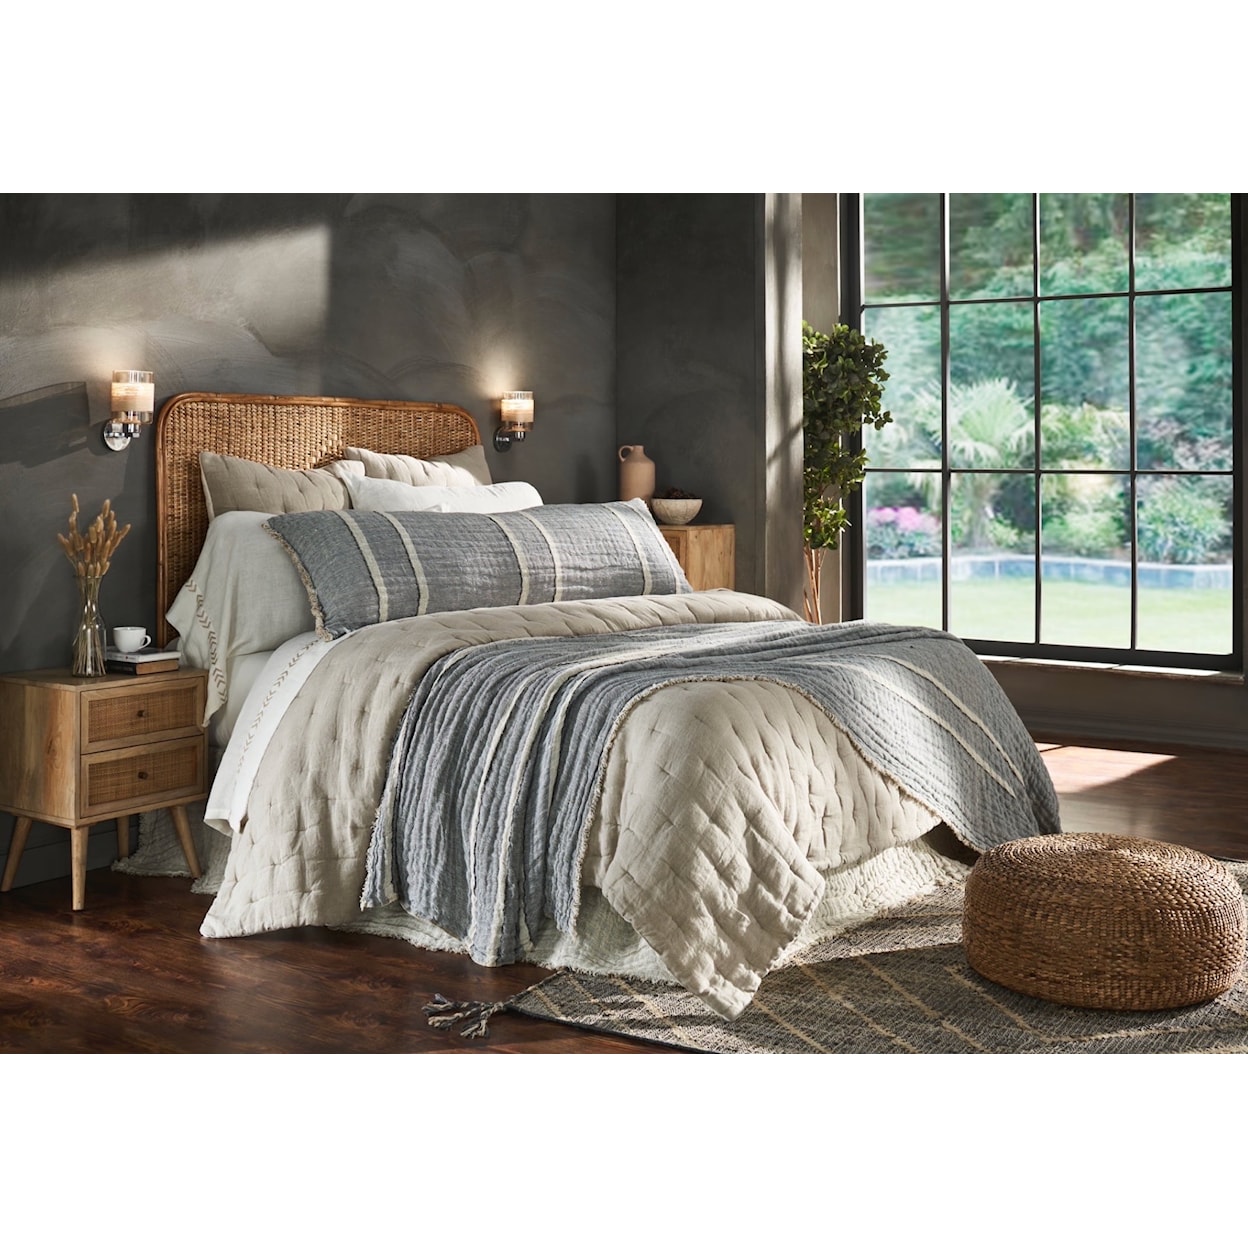 Amity Home Bedding CL141K